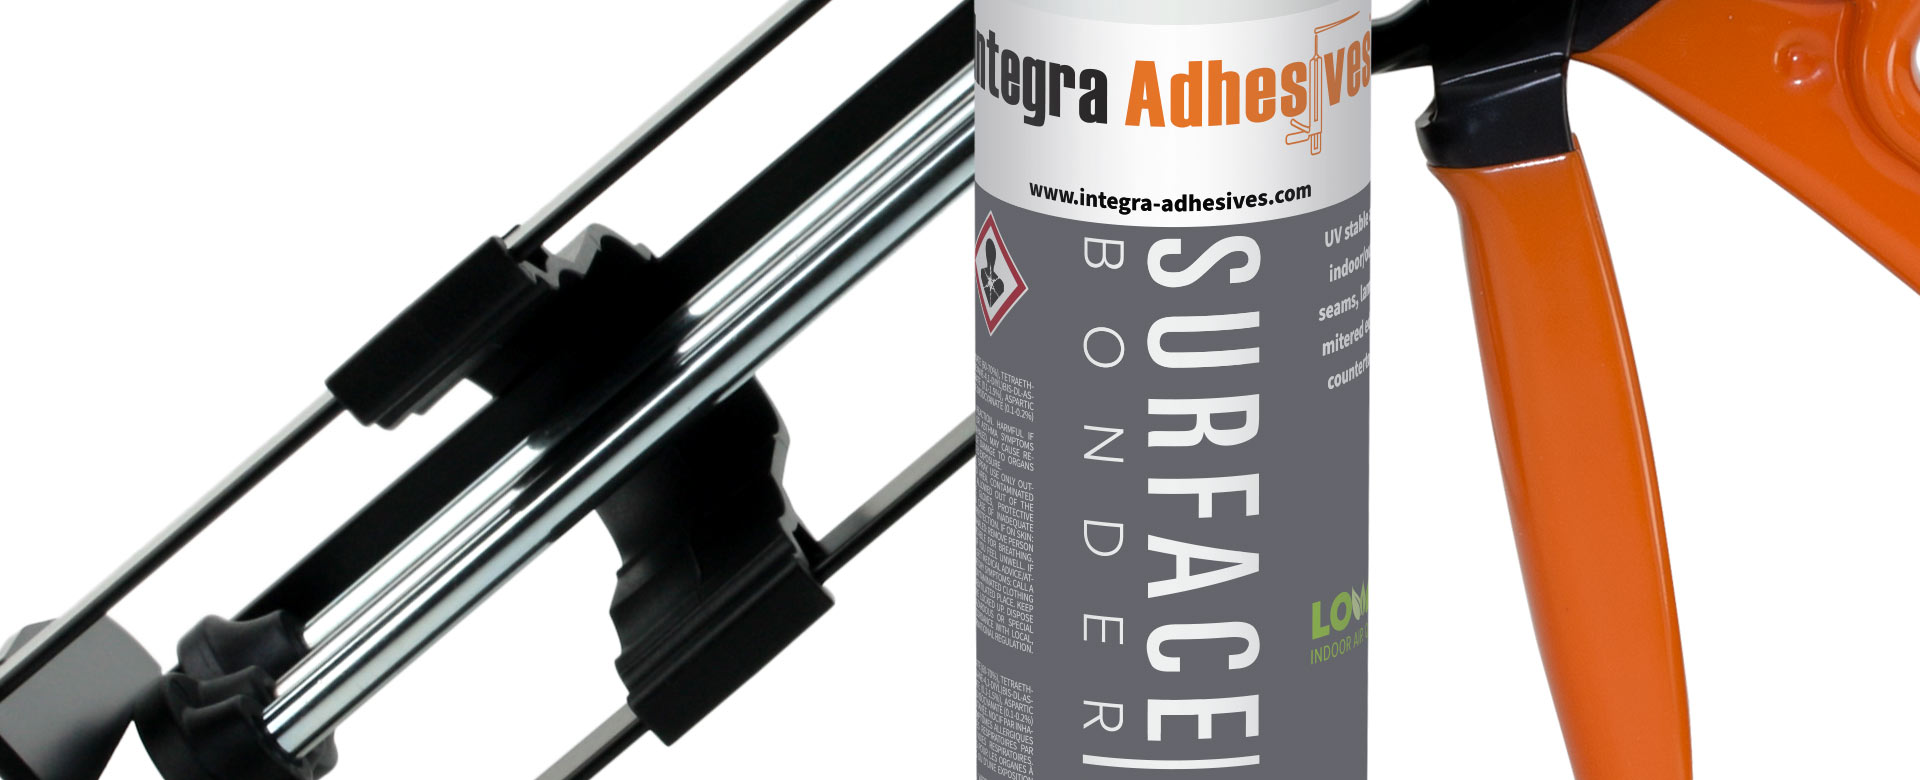 Color match Integra Adhesives Elevated Industrial Solutions